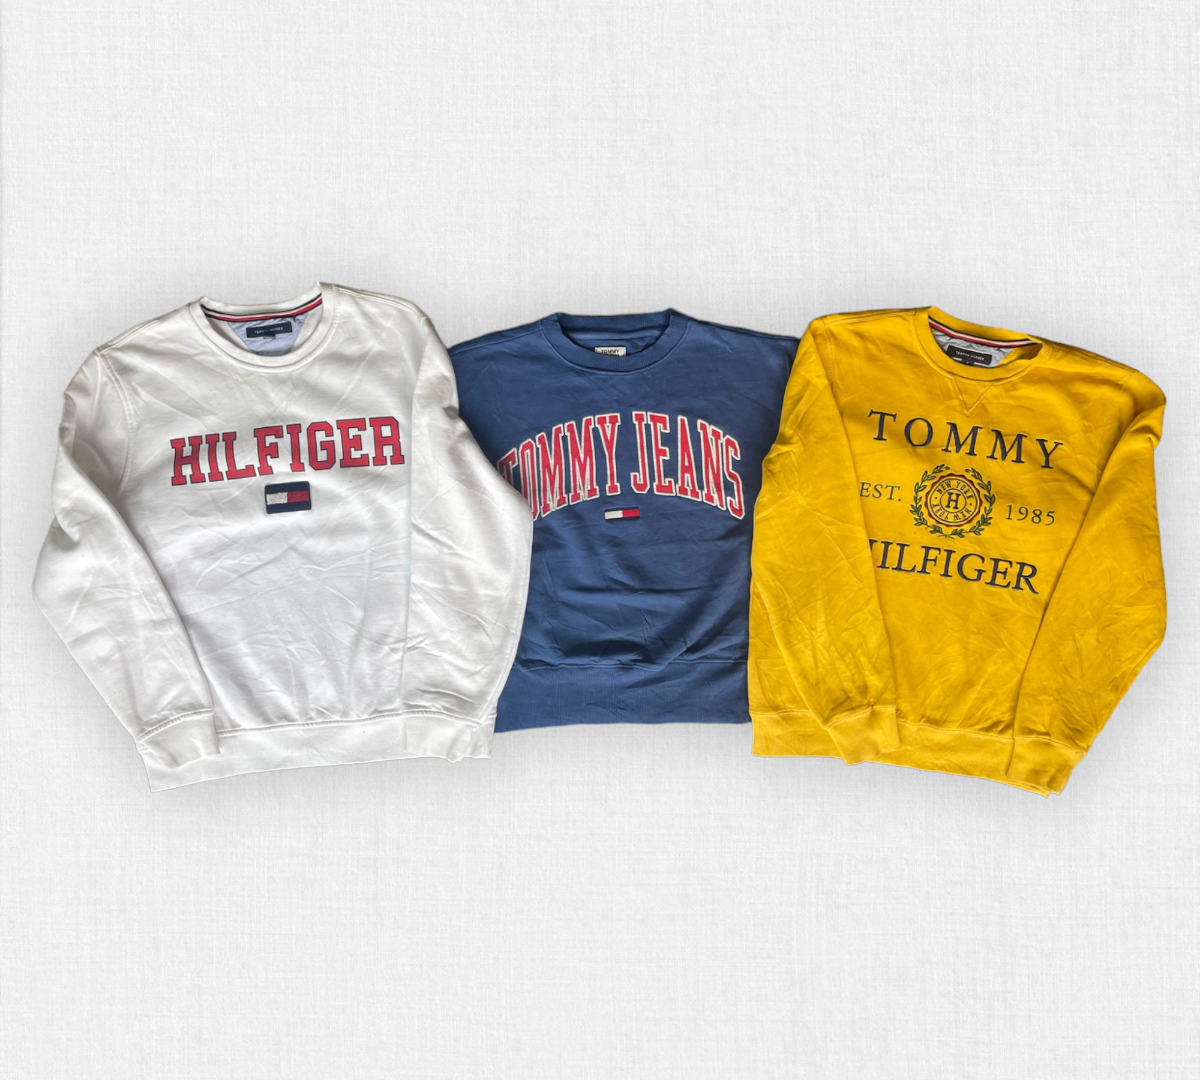 Tommy Hilfiger Sweaters (25 pieces)